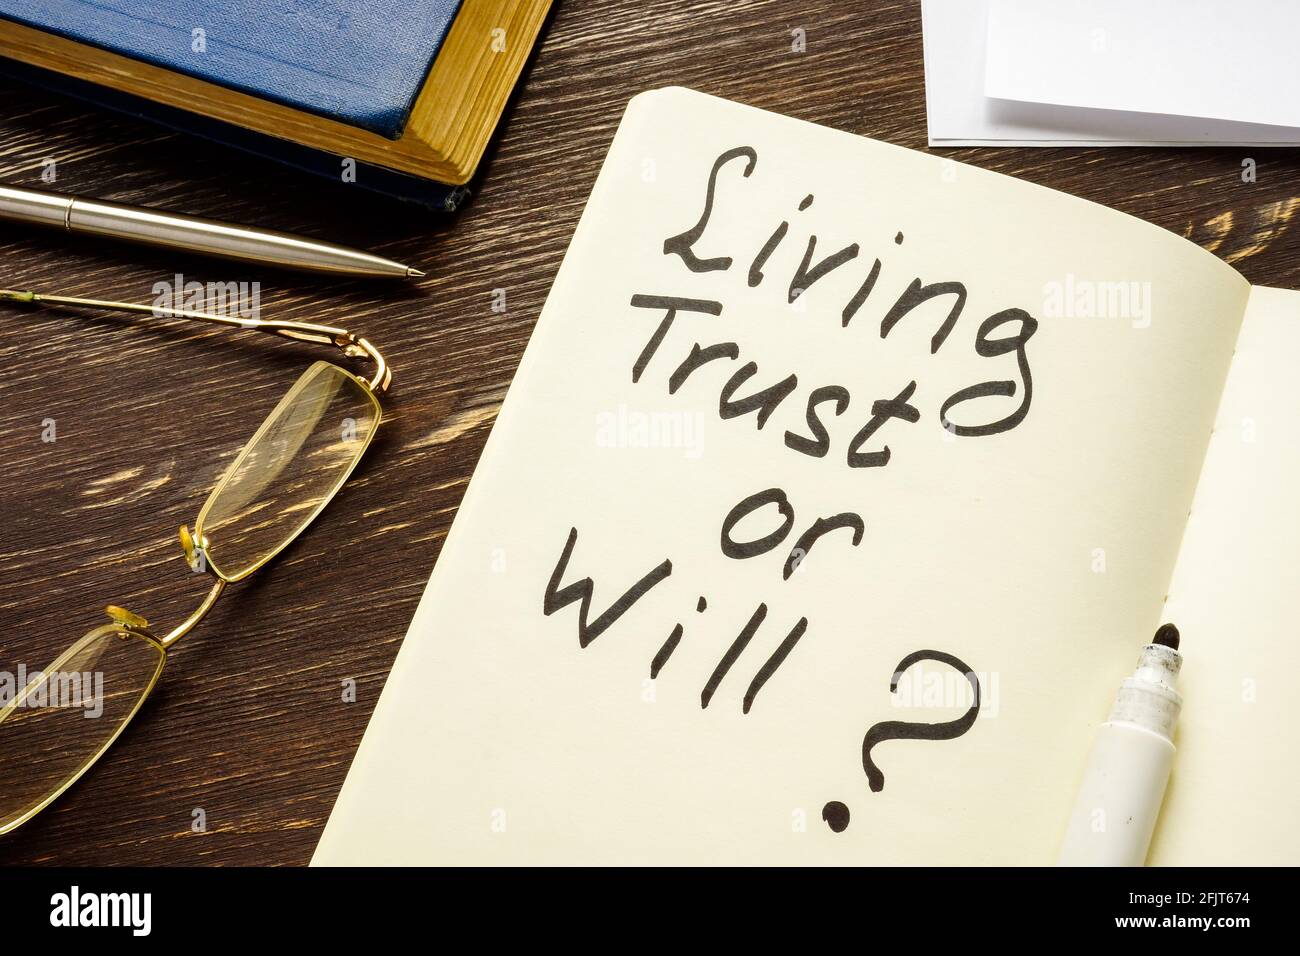 Living trust or will question on page. Stock Photo